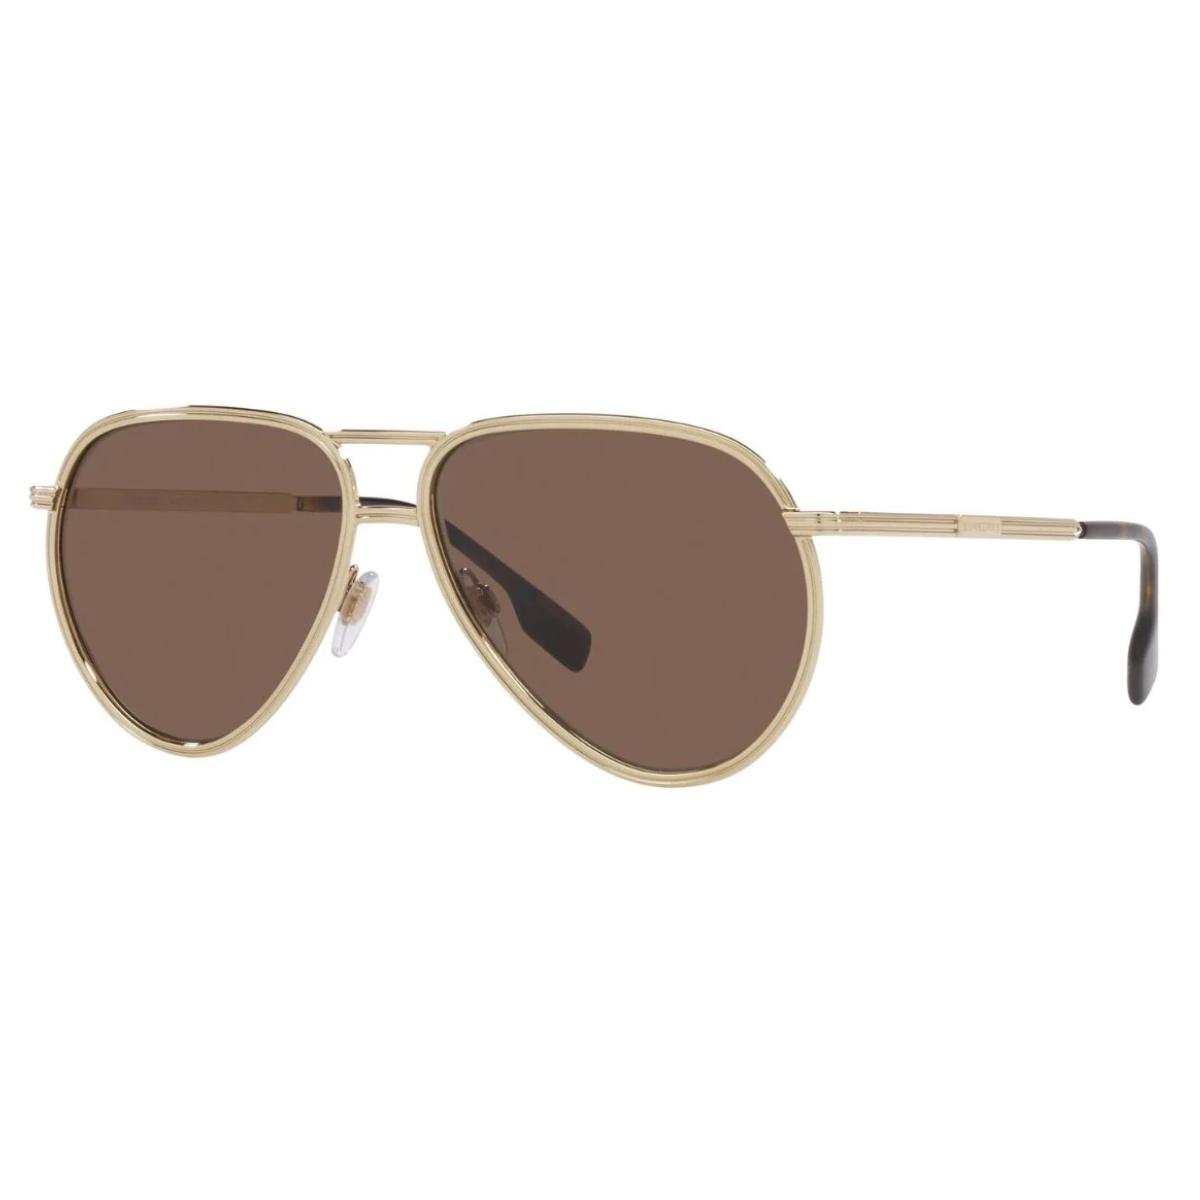 "Shop the latest Burberry sunglasses for men, including the 3135 1109/73 59 model, at Optorium: Find stylish shades and goggles for men from top brands."